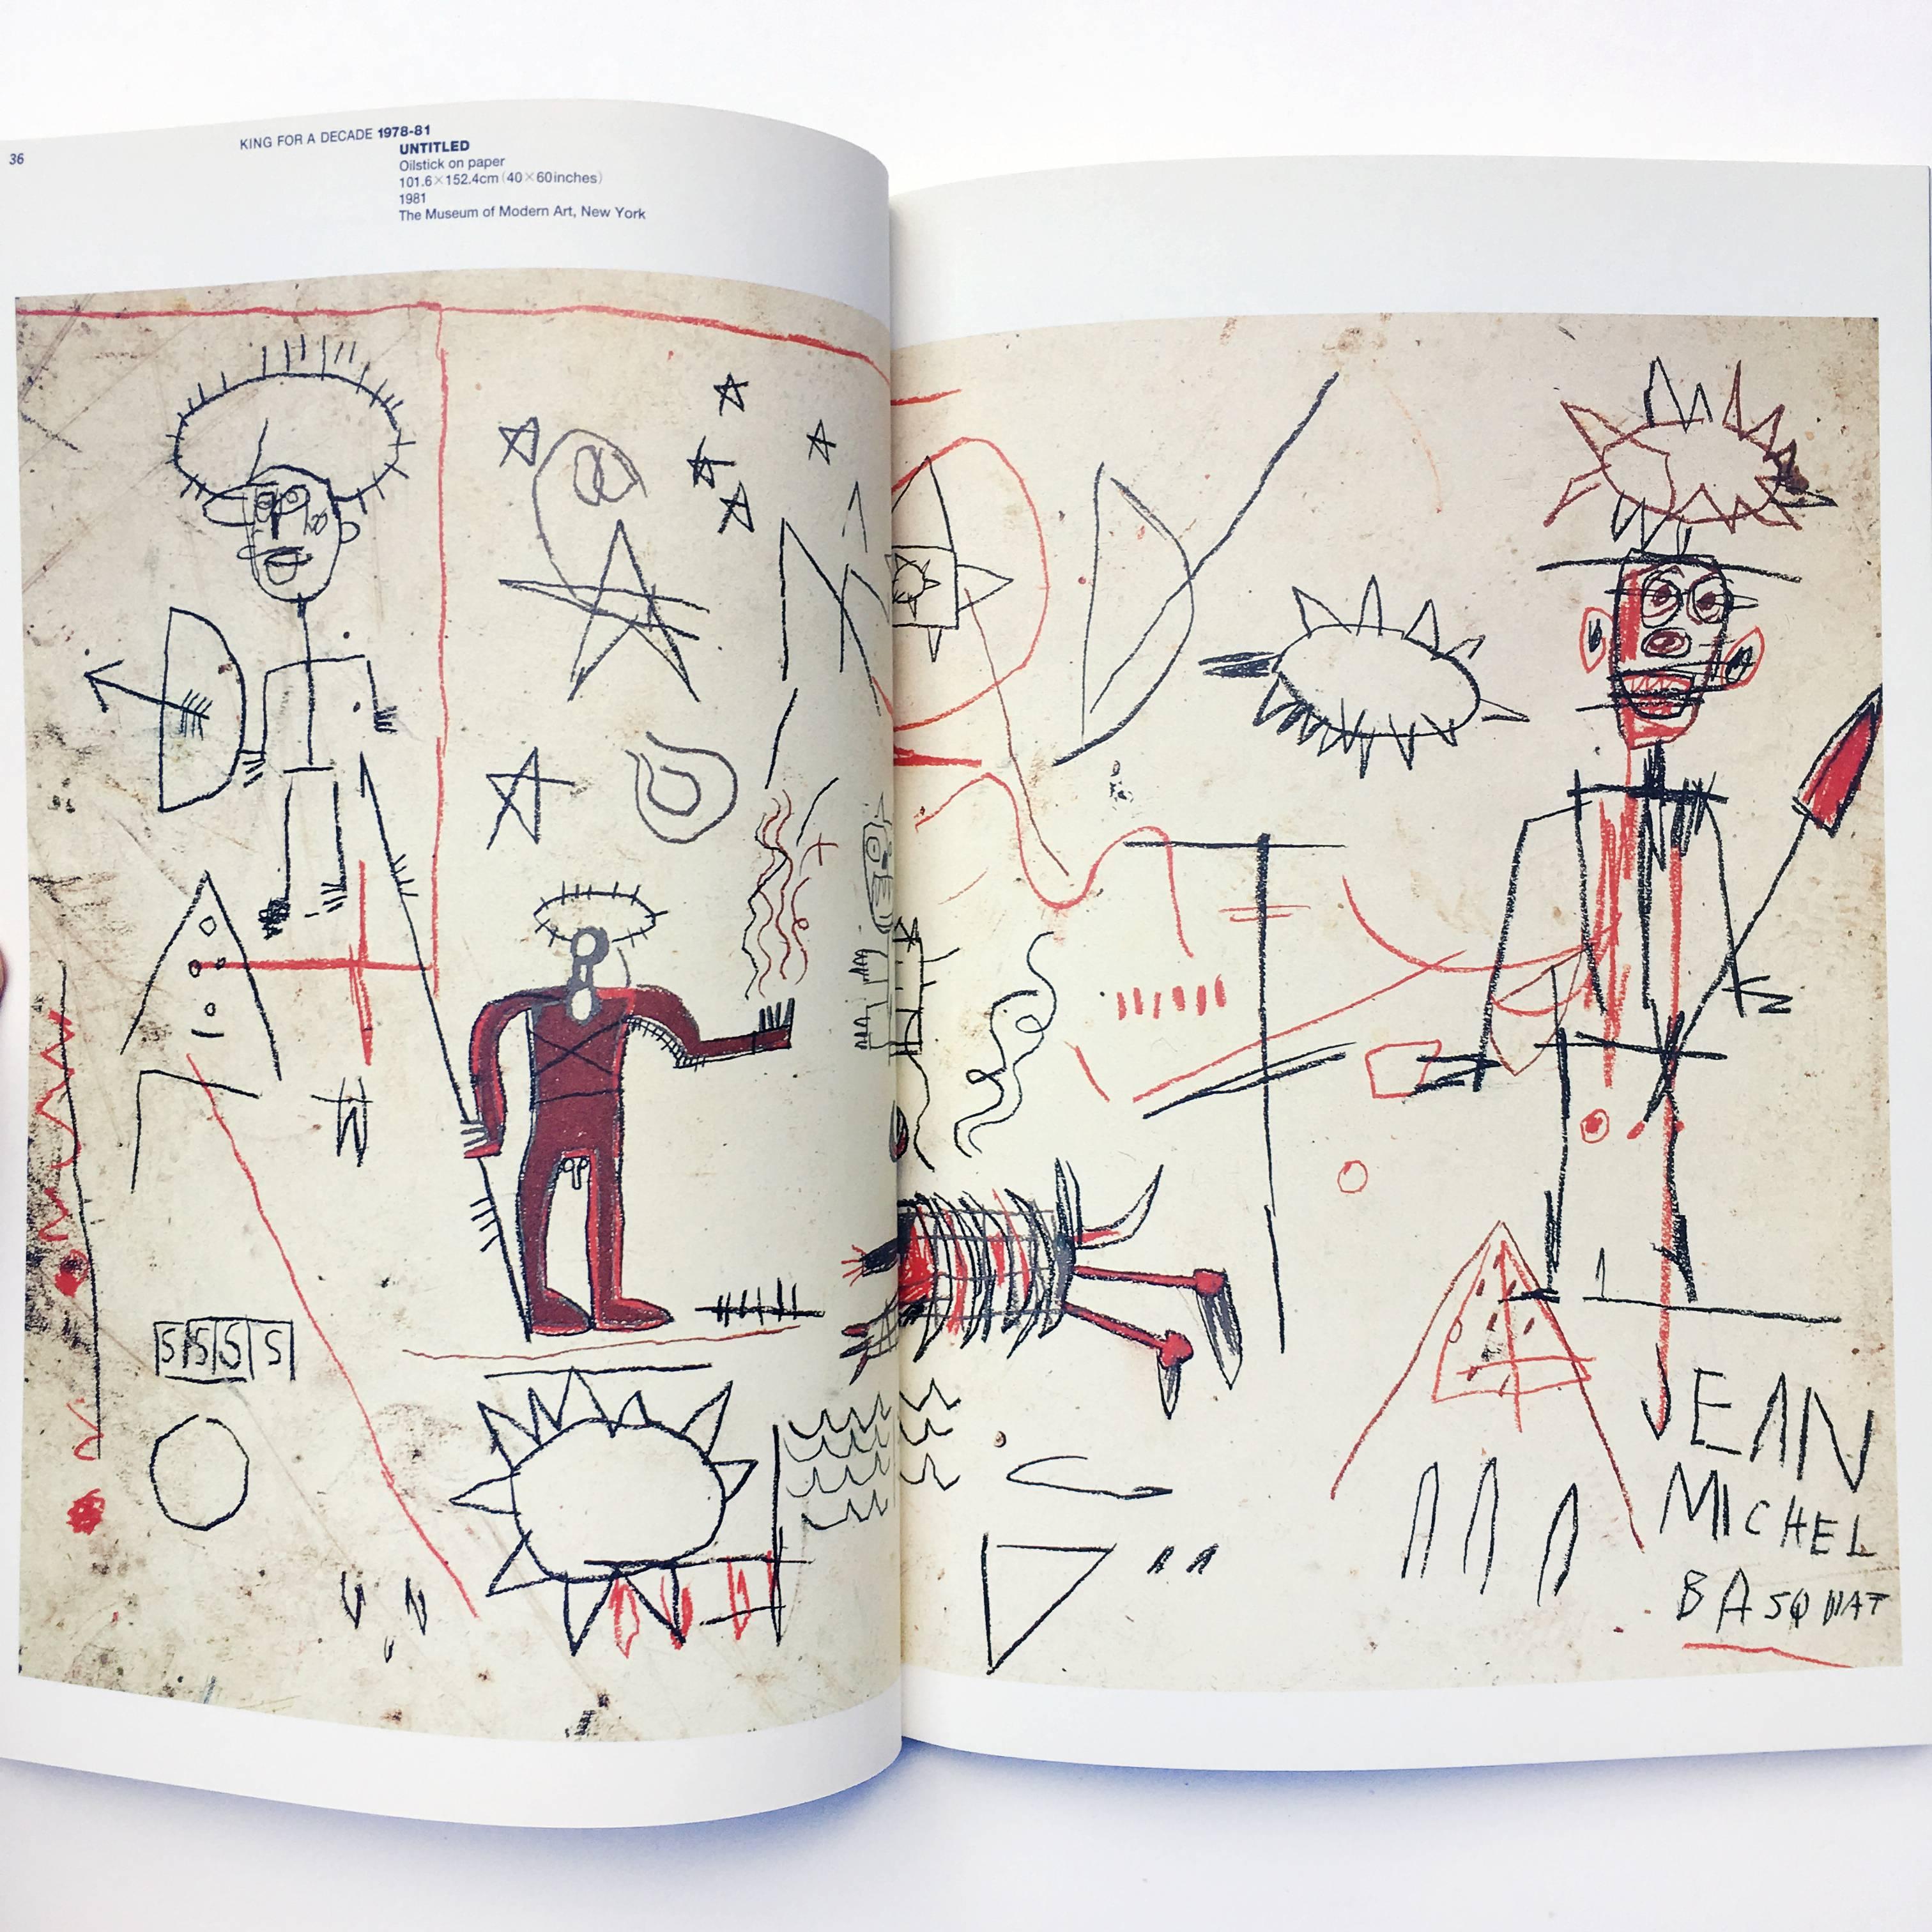 Published by Korinsha Press, 1997. 
“Since I was 17, I thought I might be a star”. 

This book couples a look into Basquiat's art and life, through a series of interviews with his contemporaries, photographs of Basquiat, and beautiful color